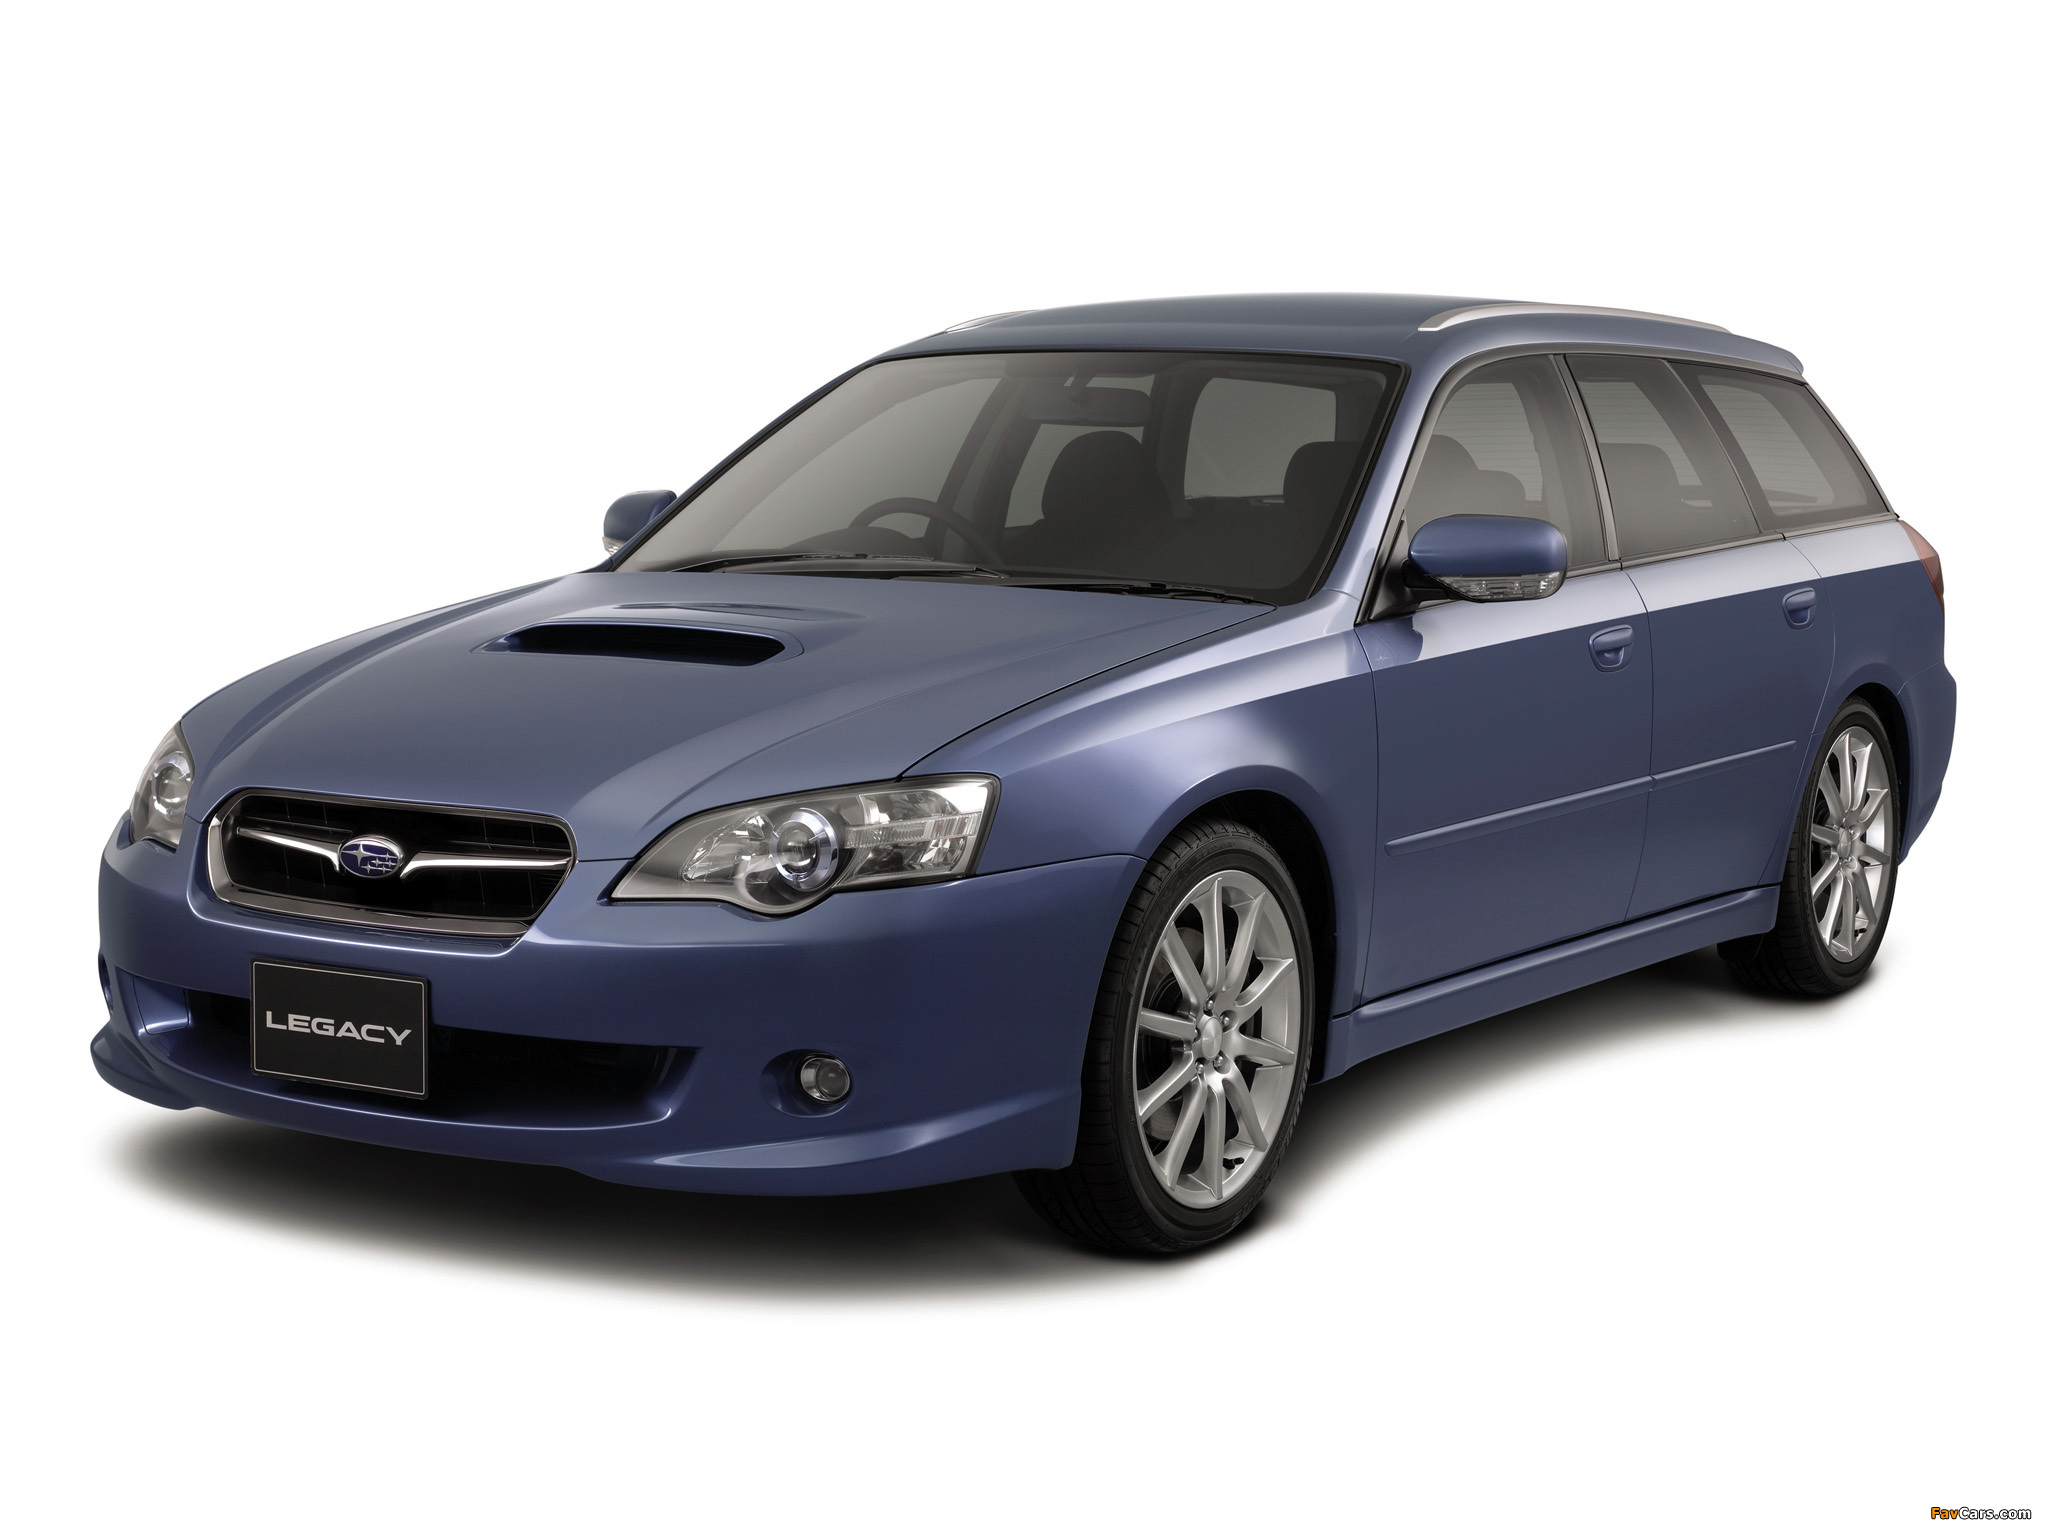 Images of Subaru Legacy 2.0 GT spec.B Touring Wagon 2003